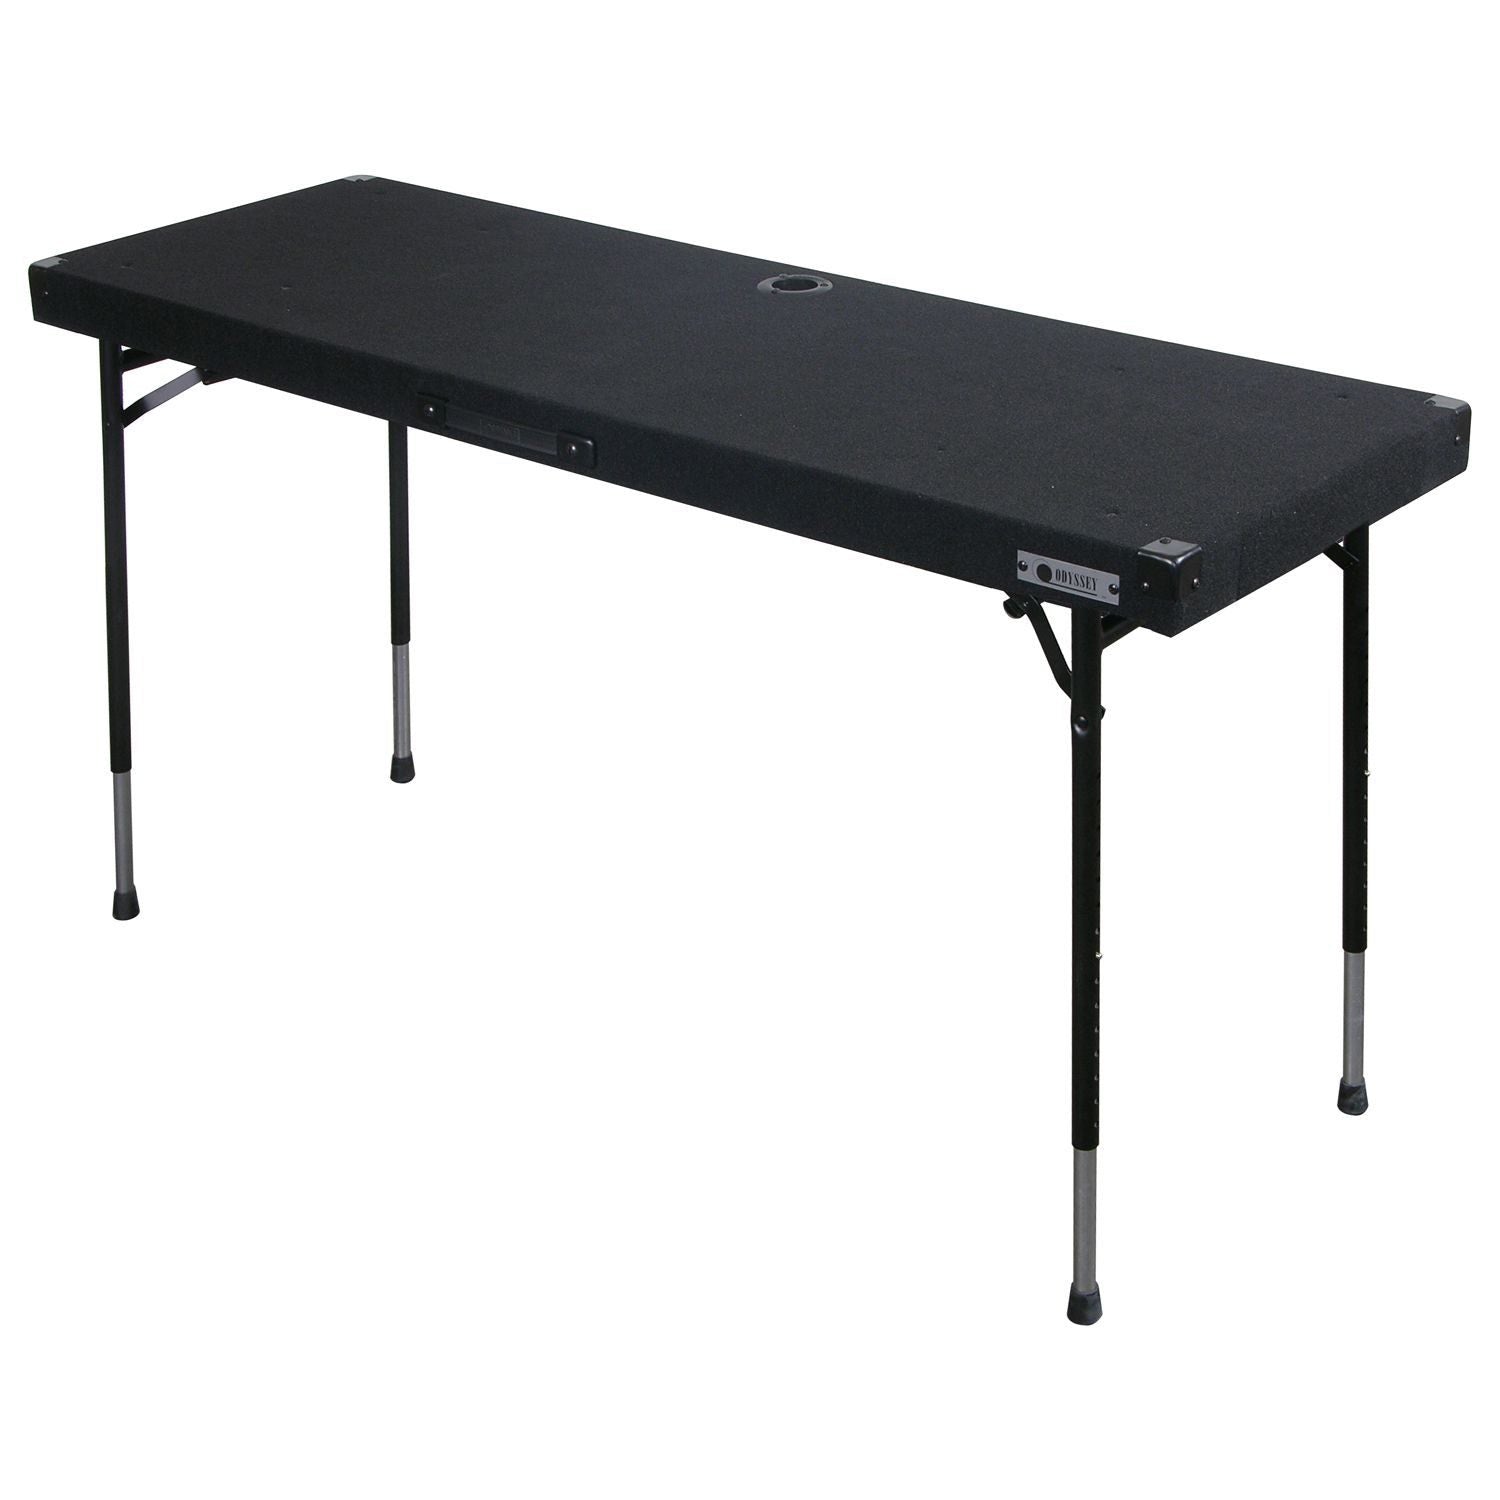 Odyssey CTBC2060, Height Adjustable DJ Table with Work Surface Carpet Odyssey